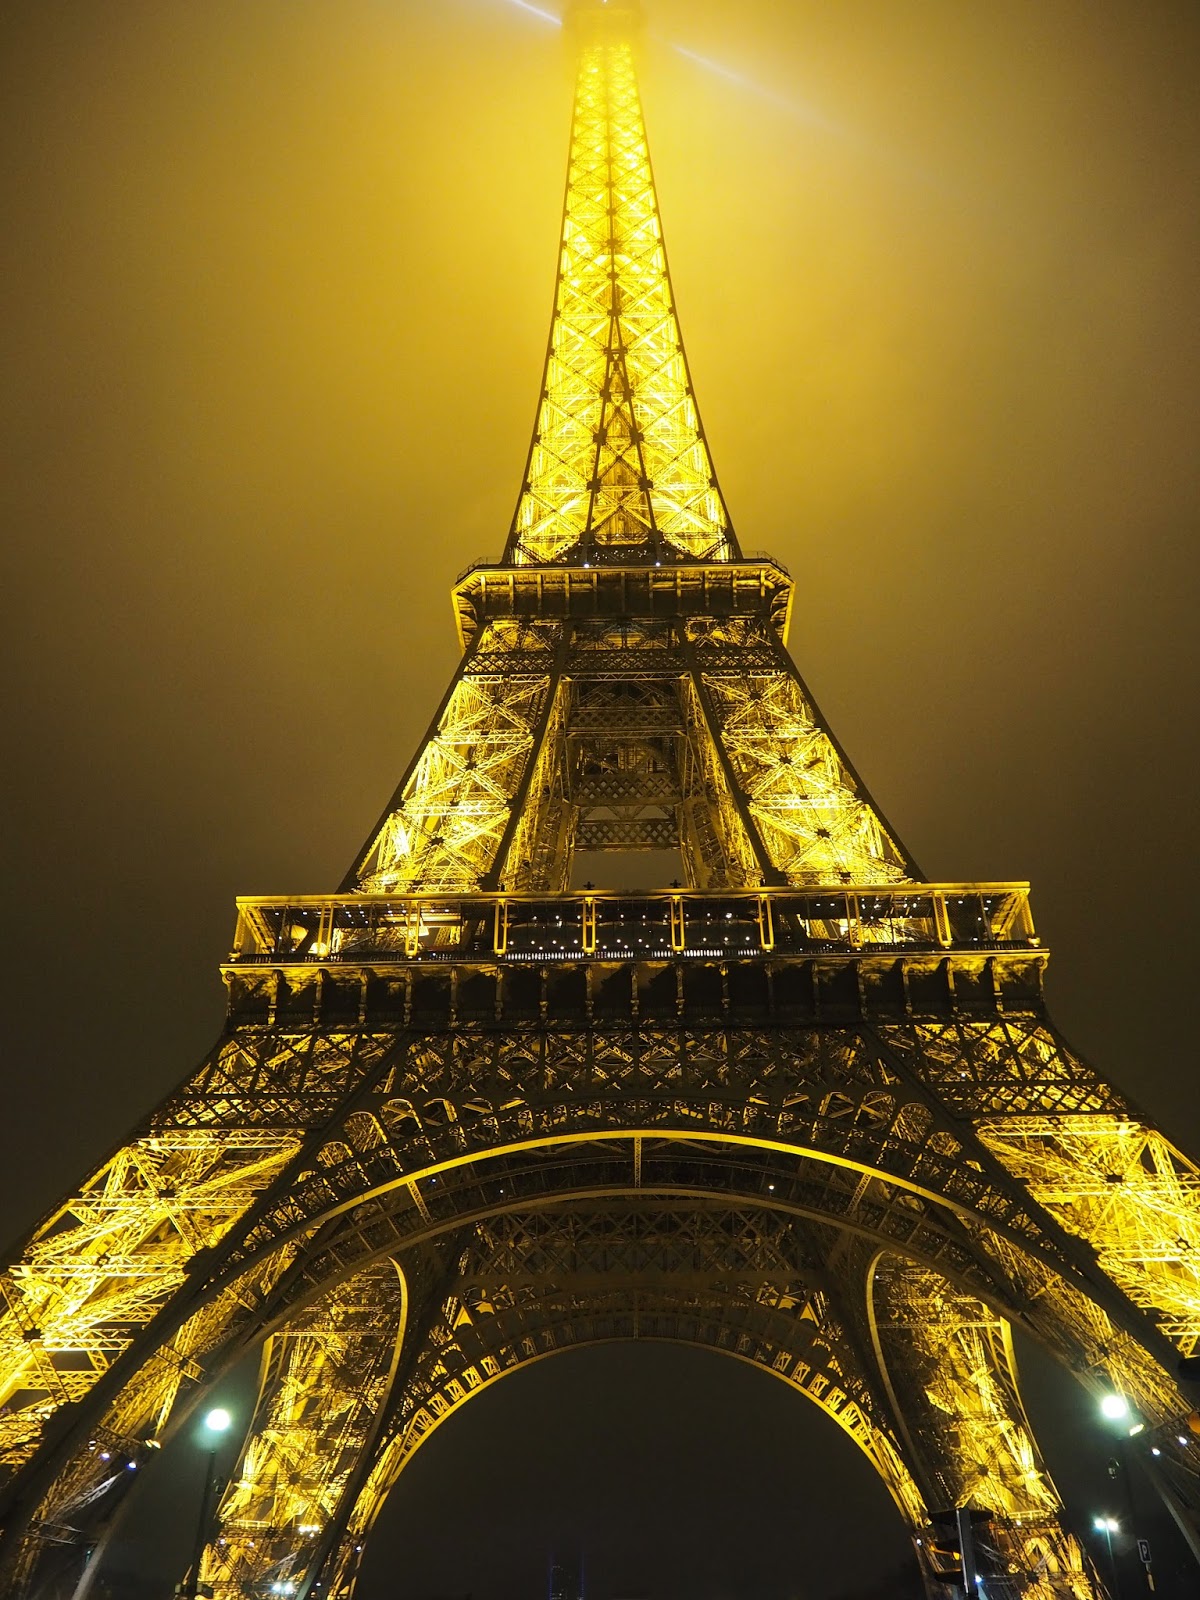 Paris City Guide - What to See - Eiffel Tower